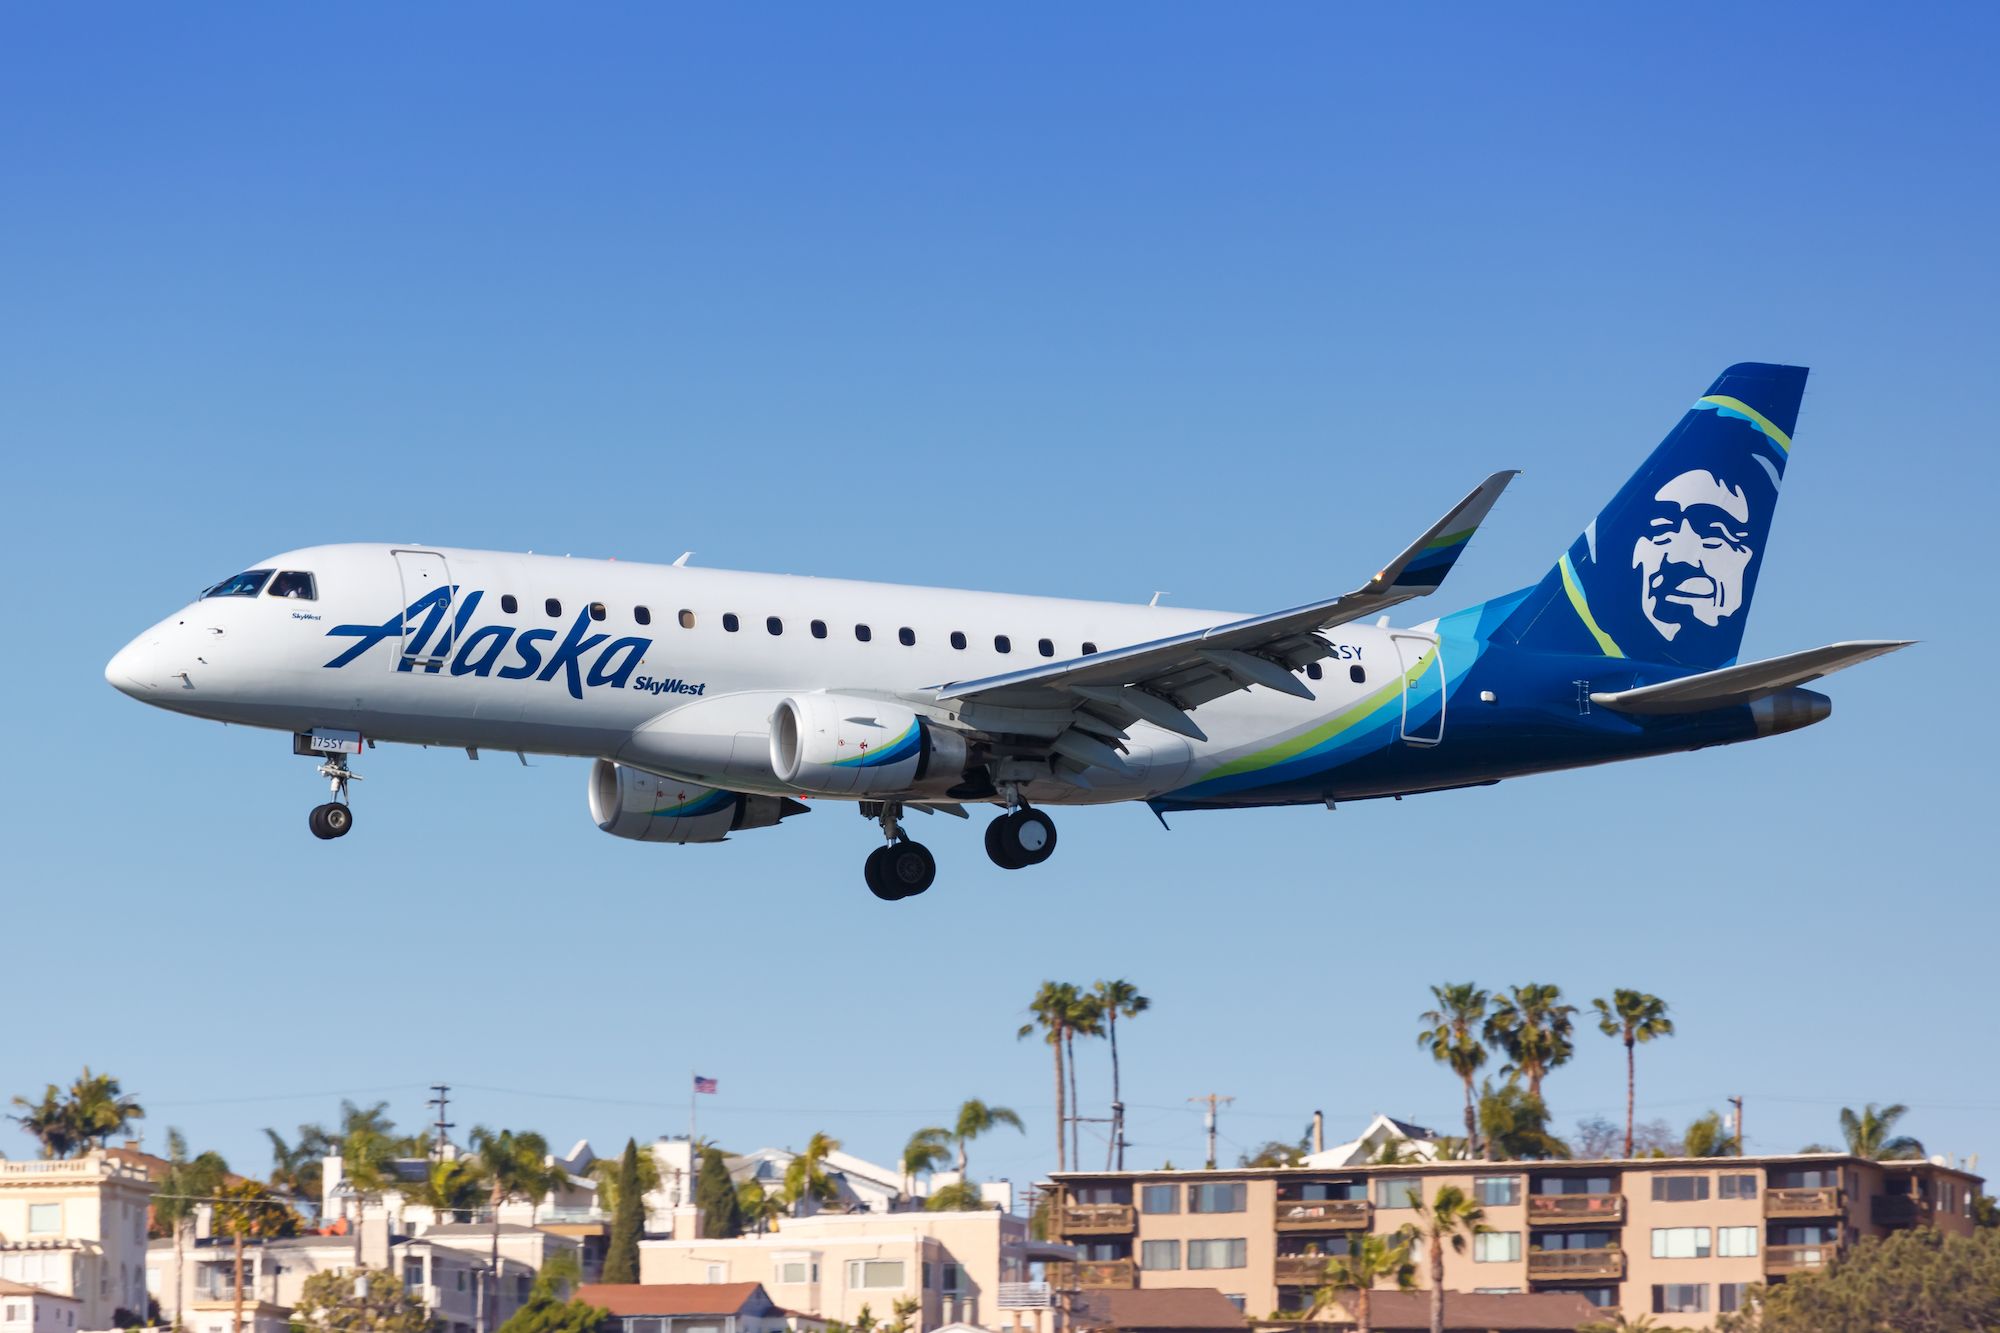 Alaska Airlines Embraer E175 on approach to San Diego International Airport SAN